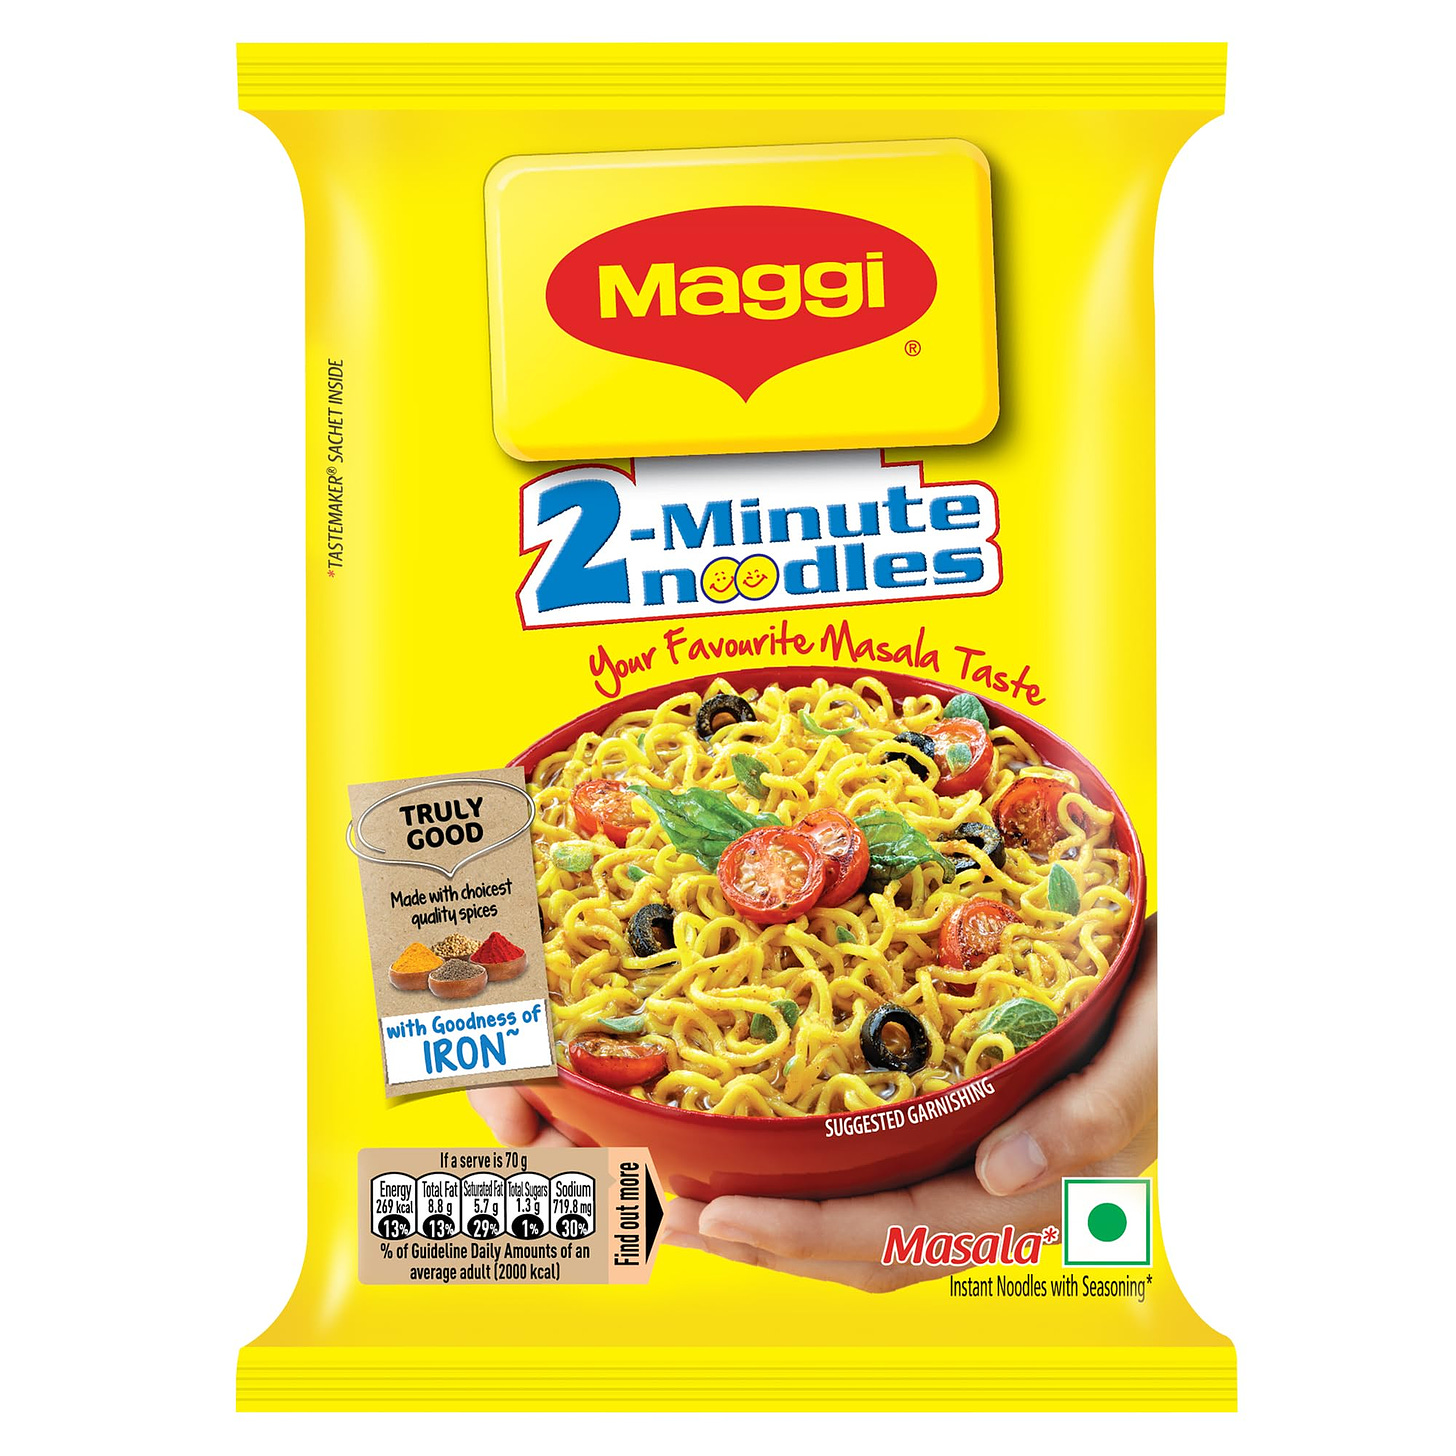 MAGGI 2-minute Instant Noodles, 70g Pouch, Masala Noodles with Goodness of  Iron, Made with Choicest Quality Spices, Favourite Masala Taste :  Amazon.in: Grocery & Gourmet Foods